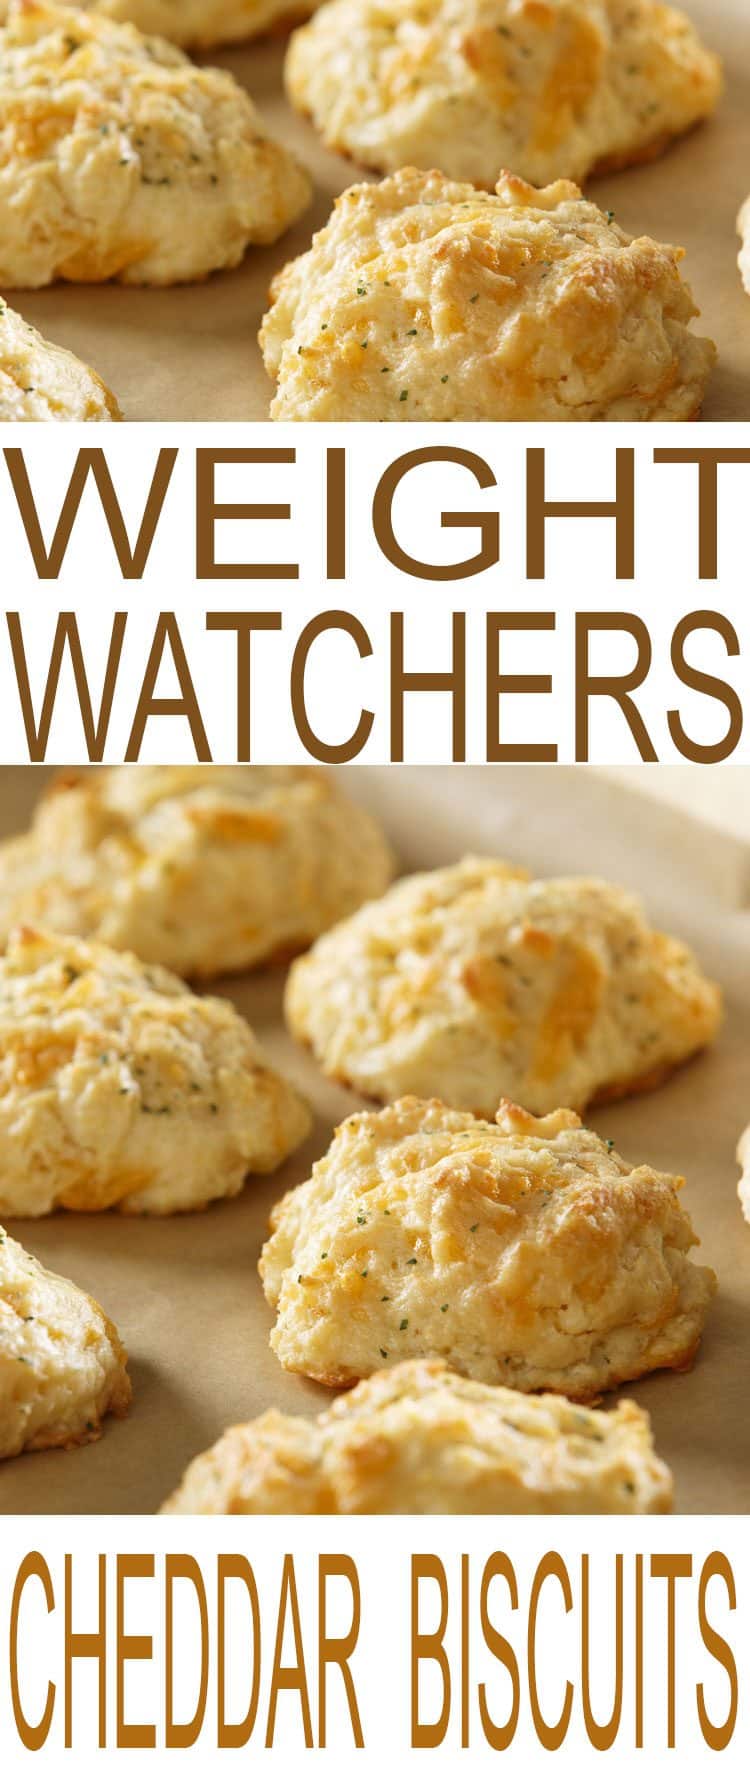 How to Make Cheese Biscuits - Weight Watchers Recipes